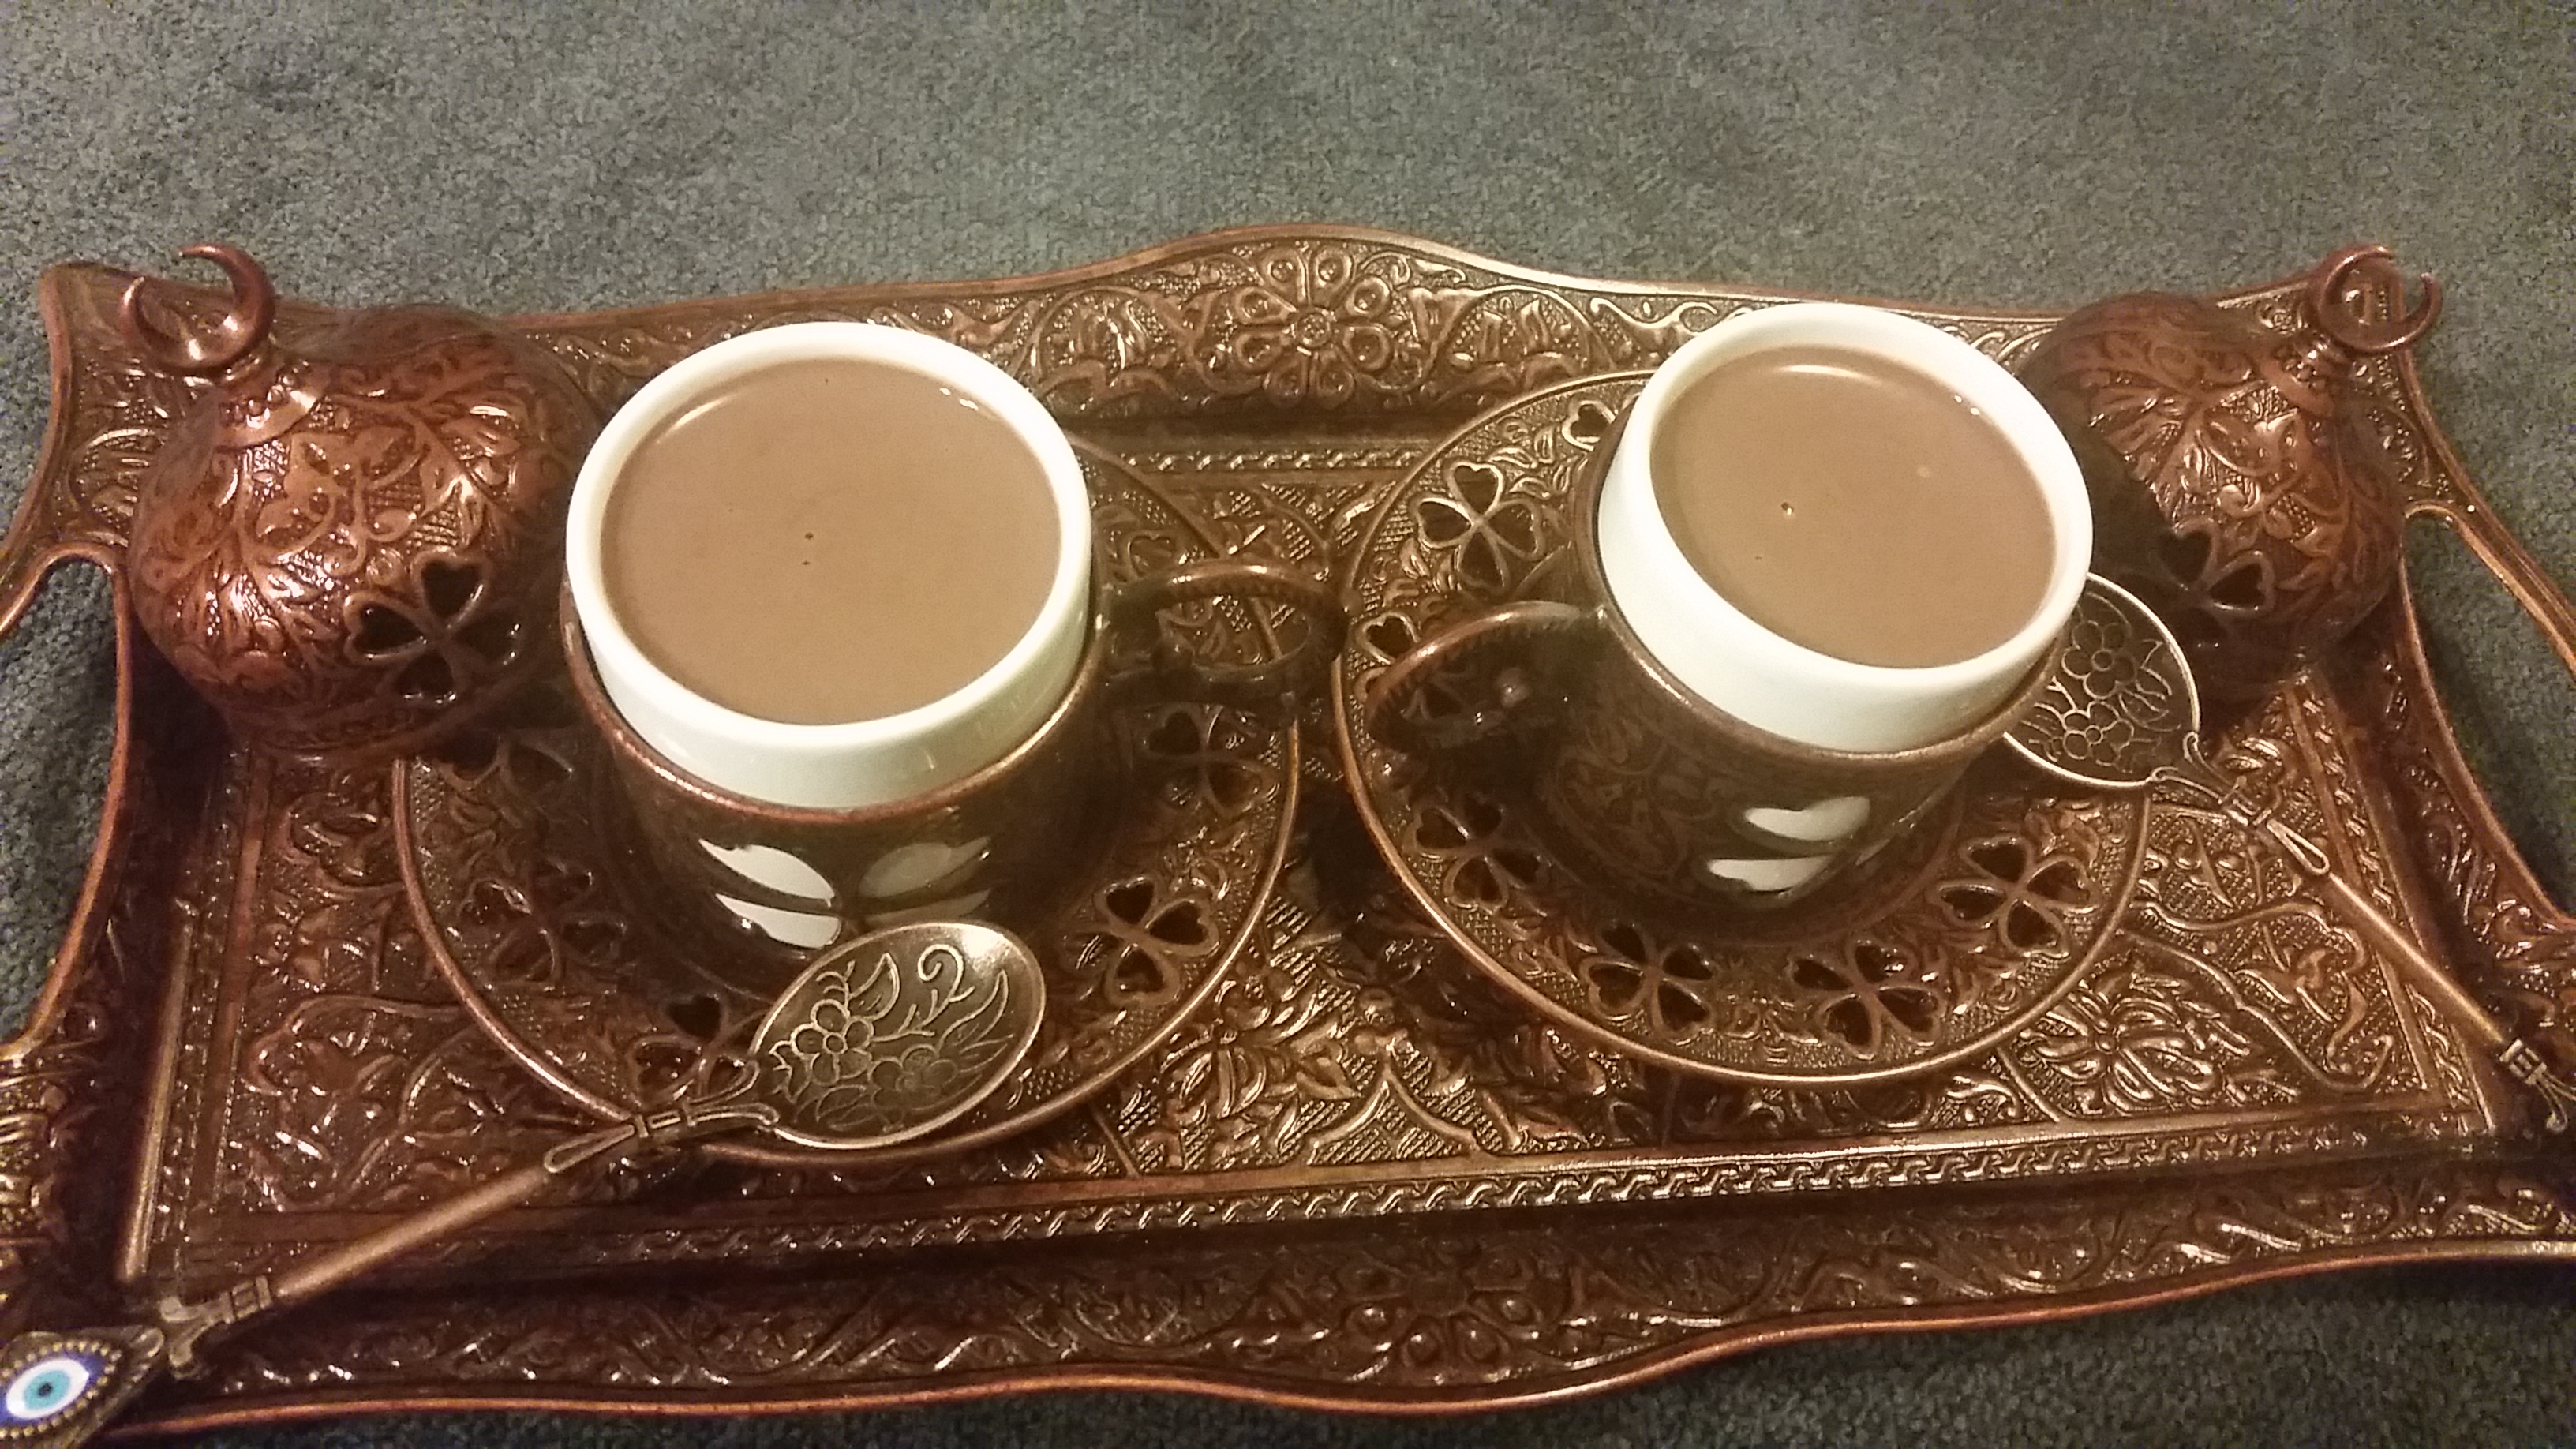 Two Turkish Coffee Cups in bronze on a bronze tray, filled with thick drinking chocolate.